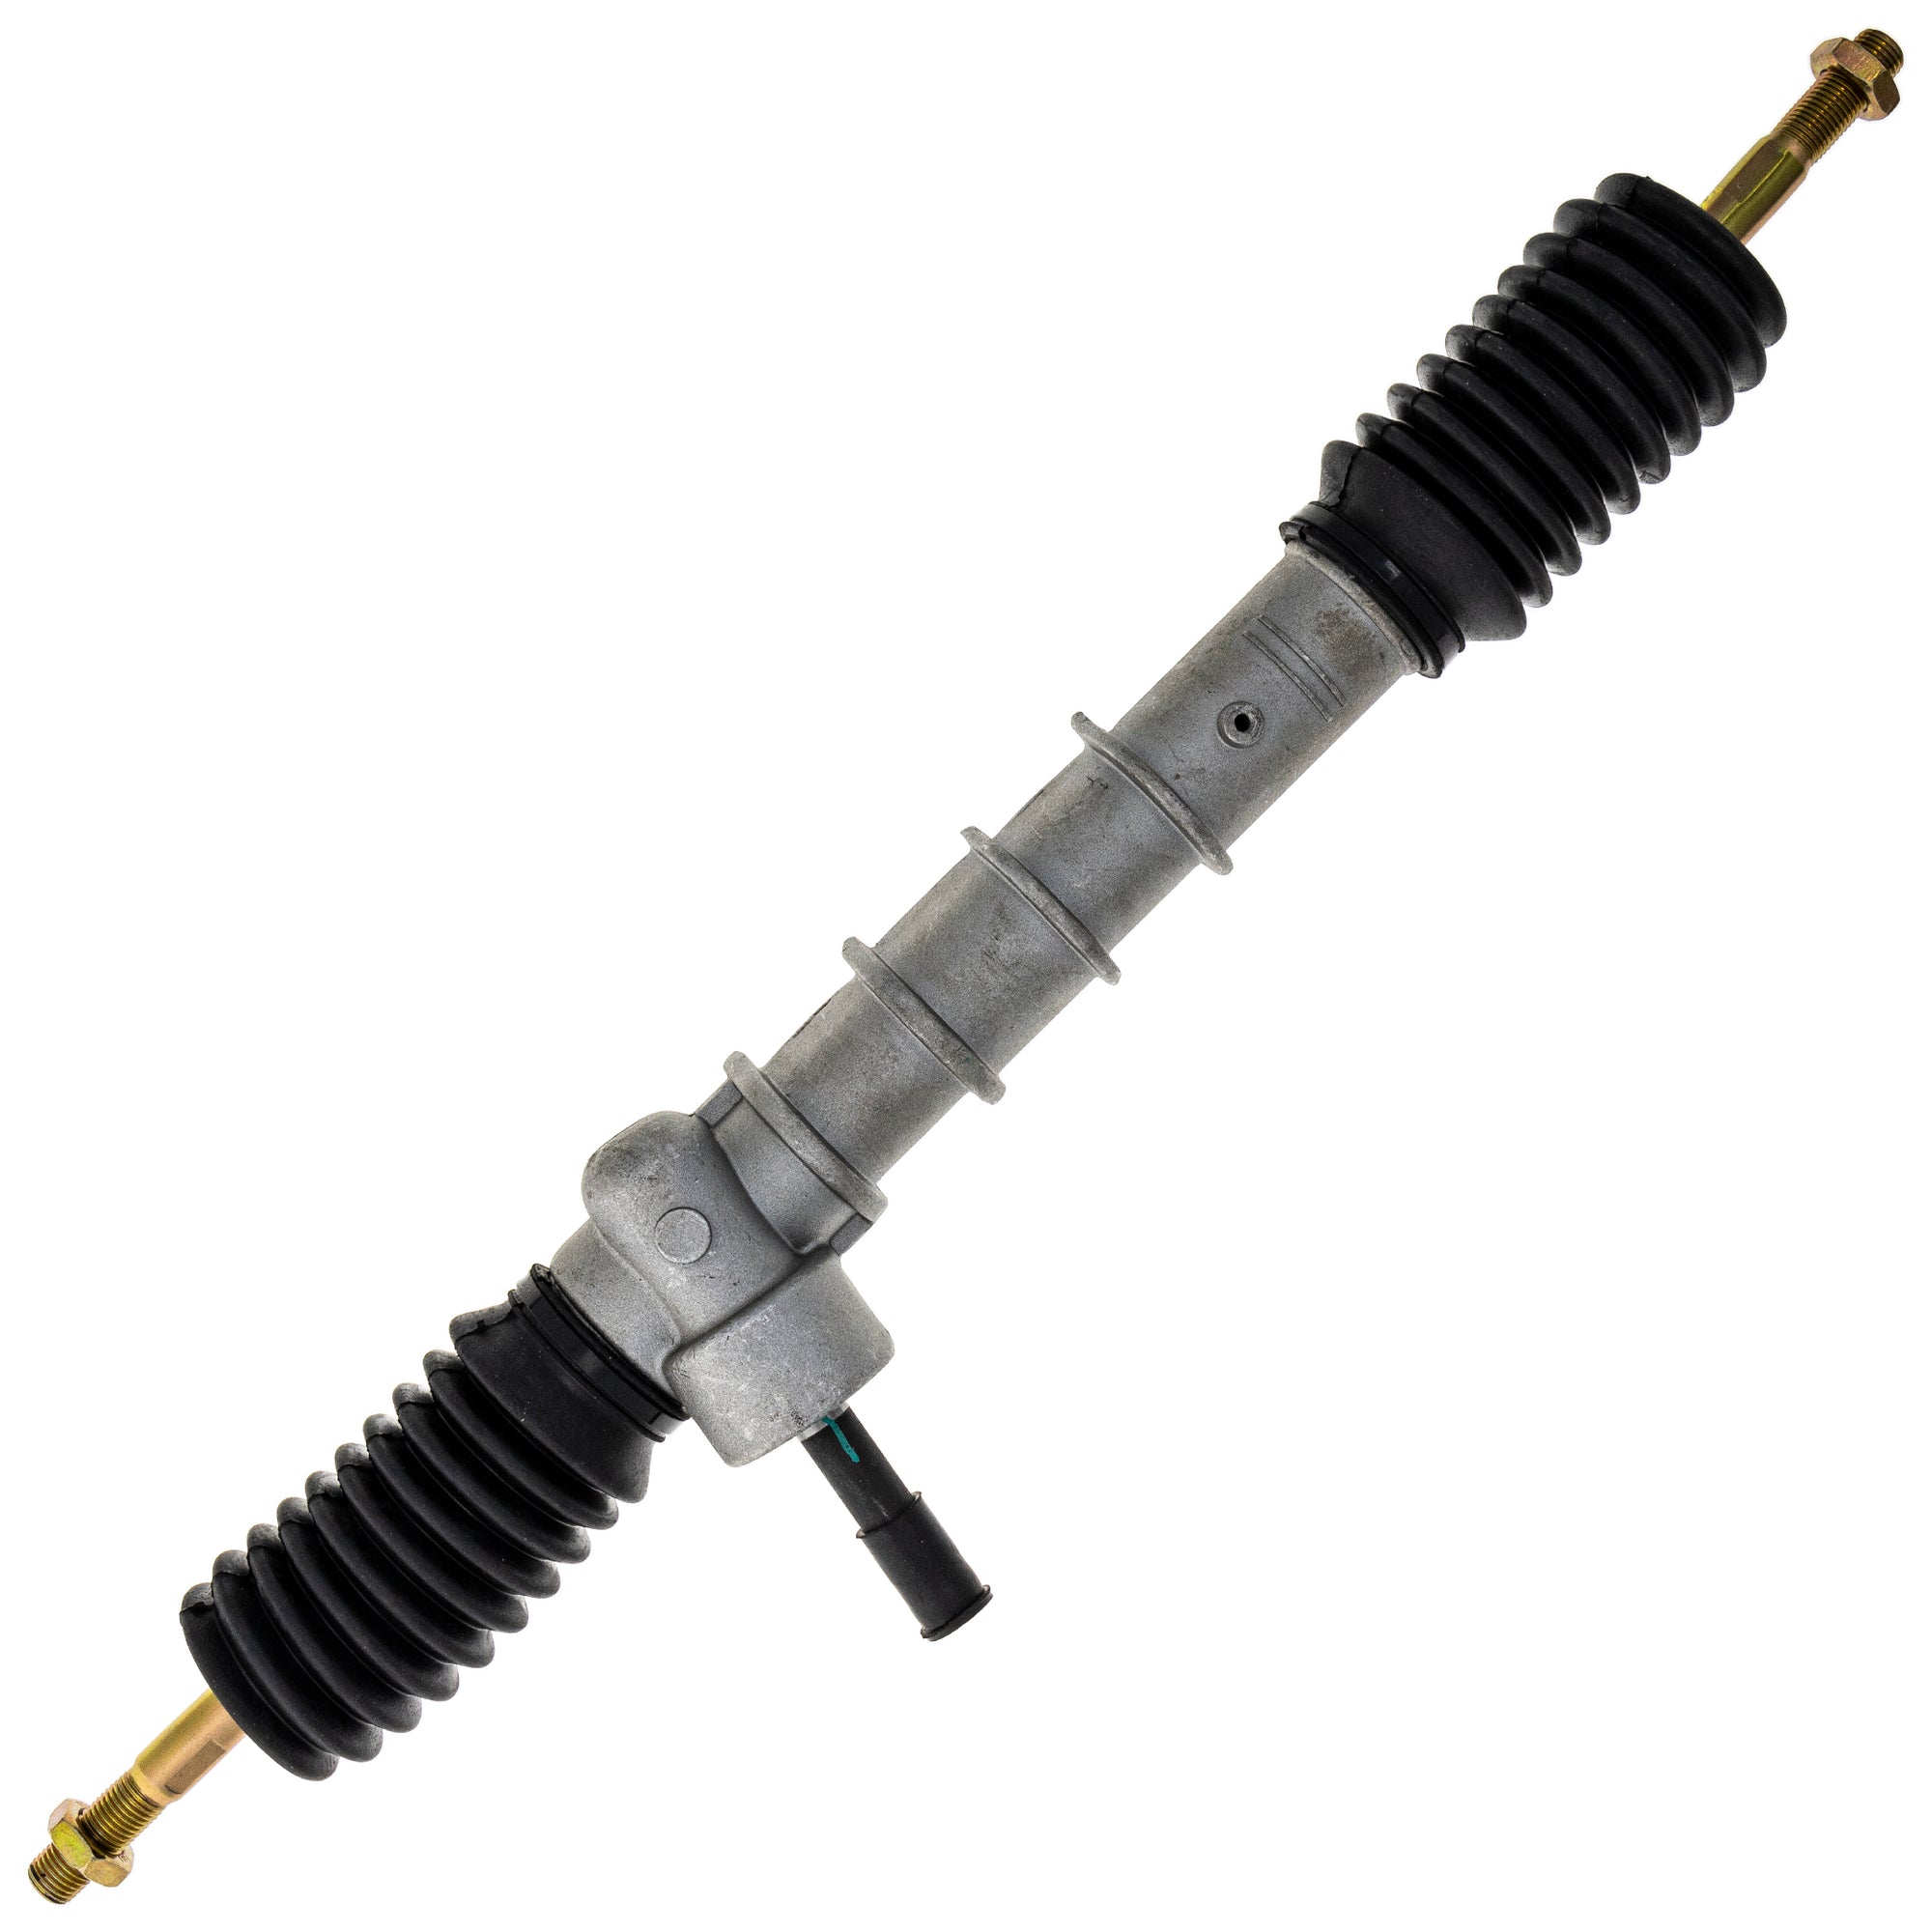 Steering Rack Assembly 519-CSR2225A For Kawasaki 39191-0022 39191-0017 39191-0014 39191-0001